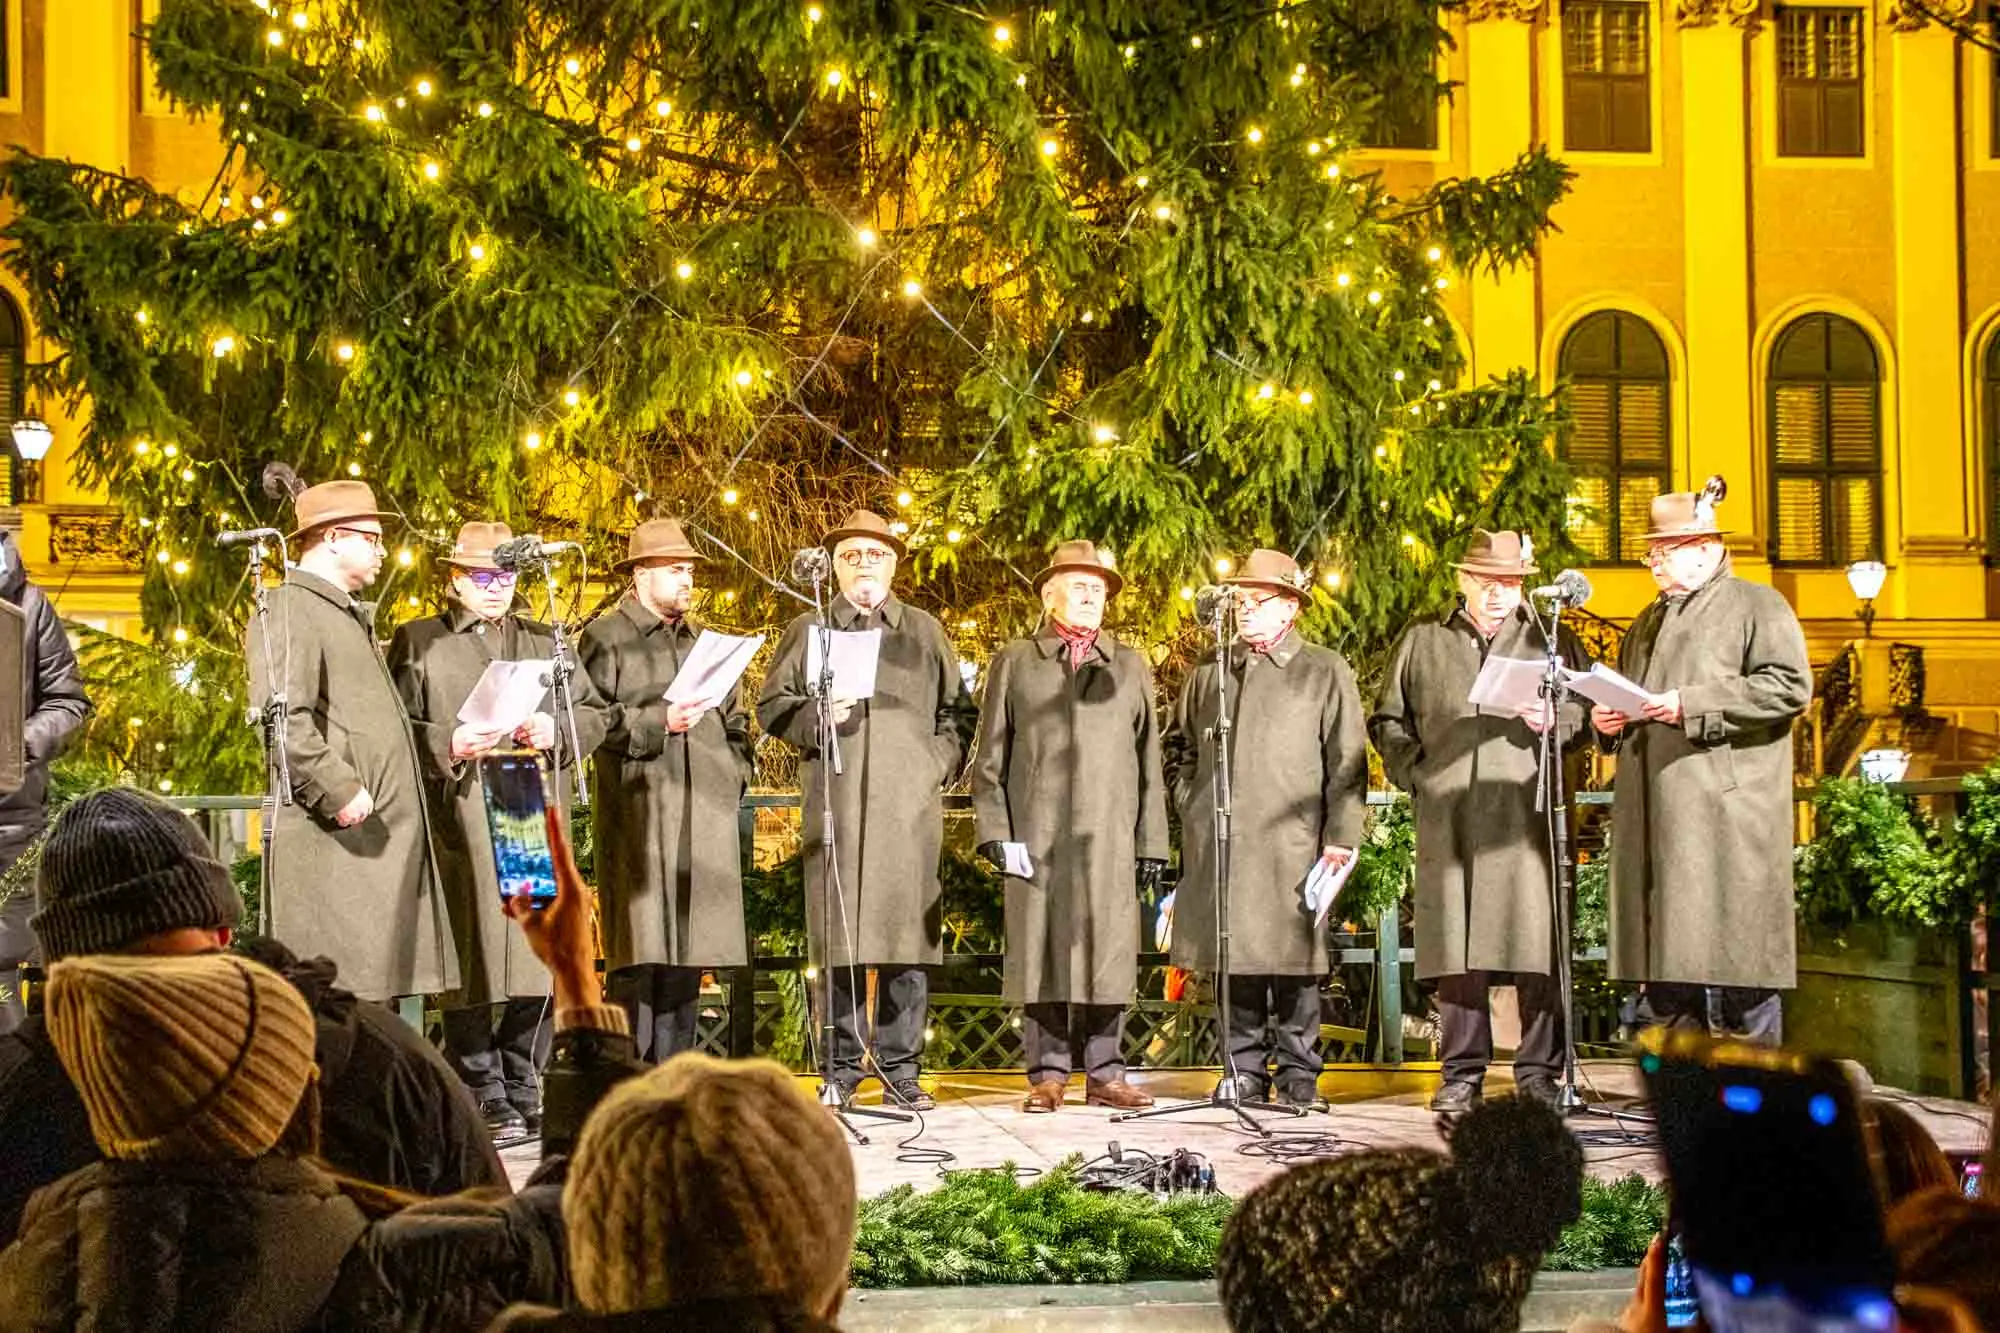 Men's choir performing on stage in front of a Christmas tree.